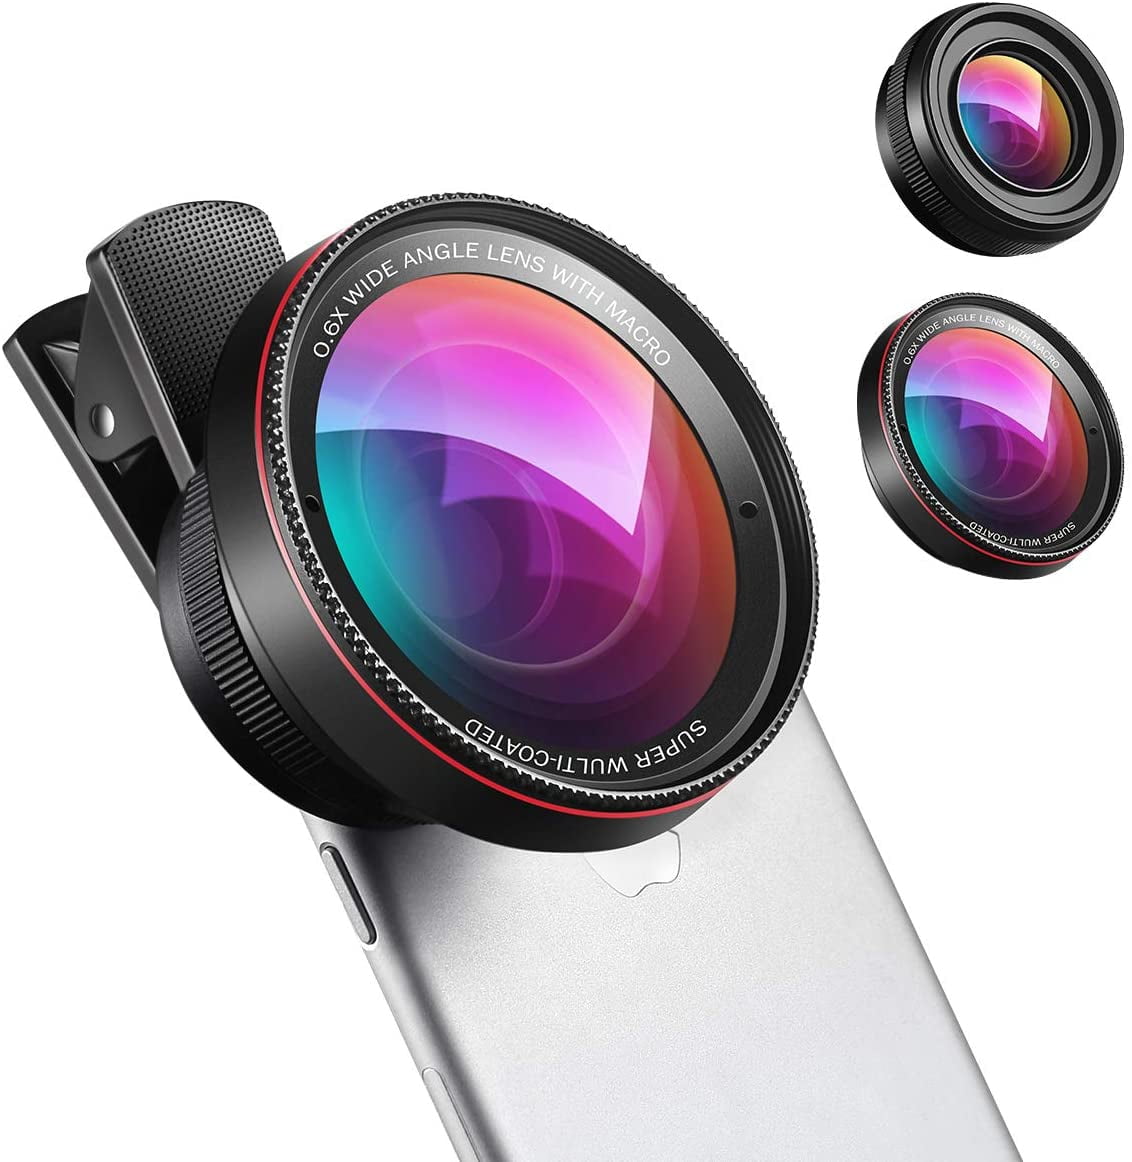 Gold HD Clip-on Camera Lens other Smartphones 0.45X Wide Angle Lens Multi-Function 12x Zoom Telephoto Lens Samsung 15X Super Macro Lens For iPhones 